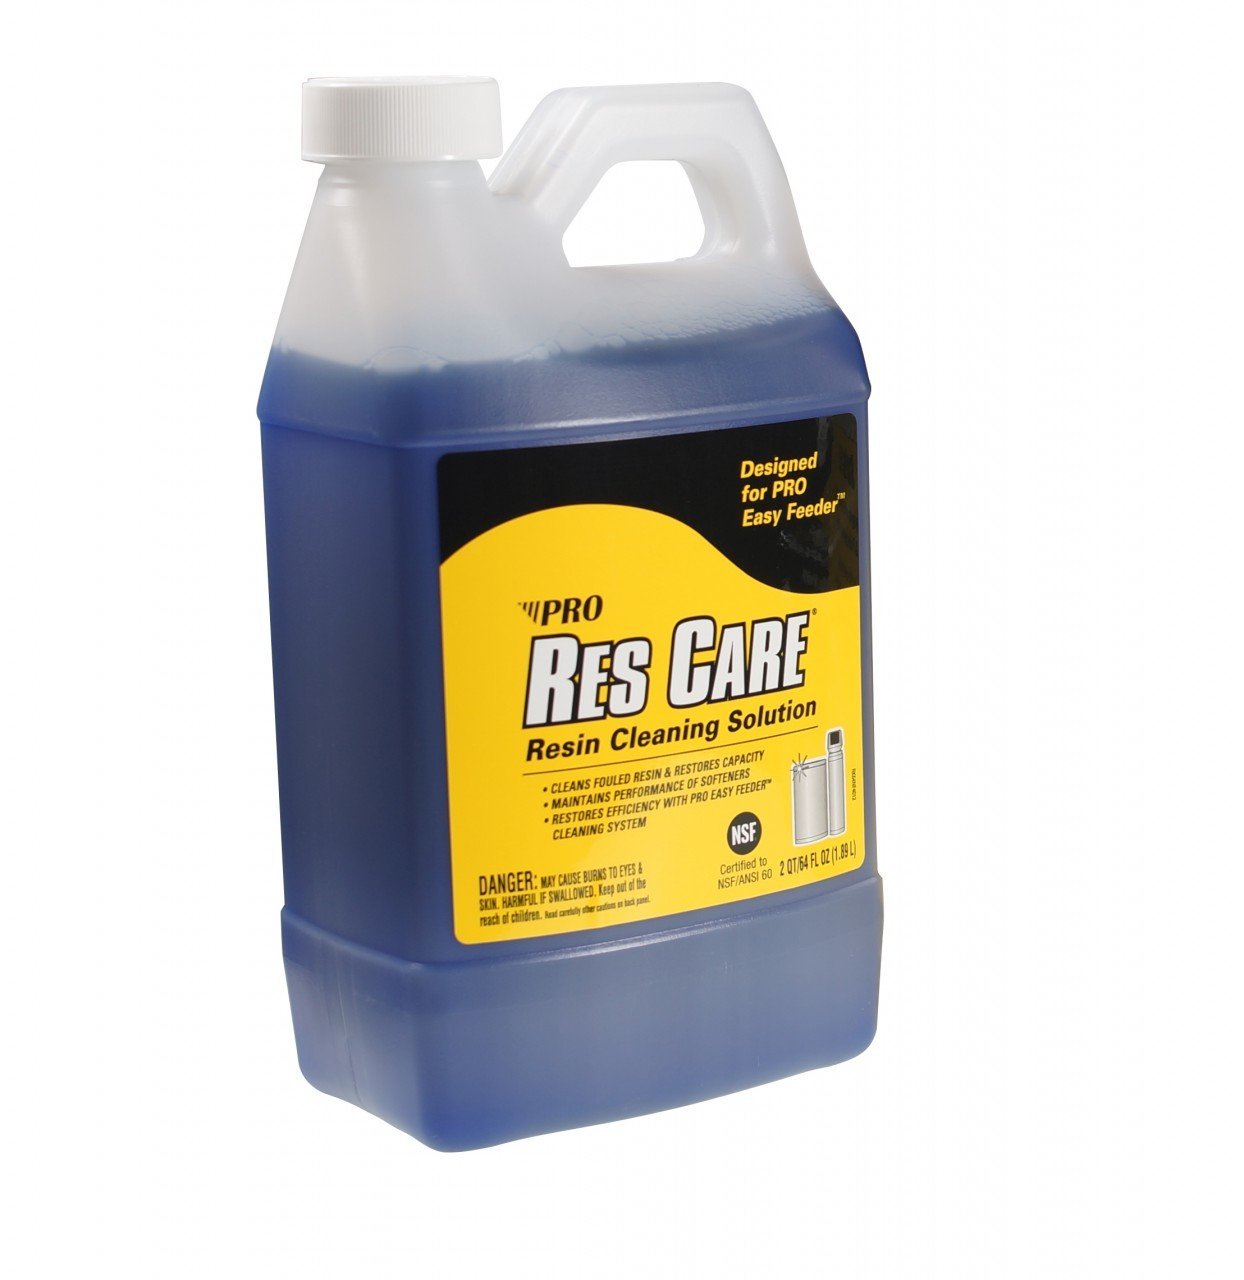 Pro Products - Rk64n - Water Softener Cleaner, Liquid Resin